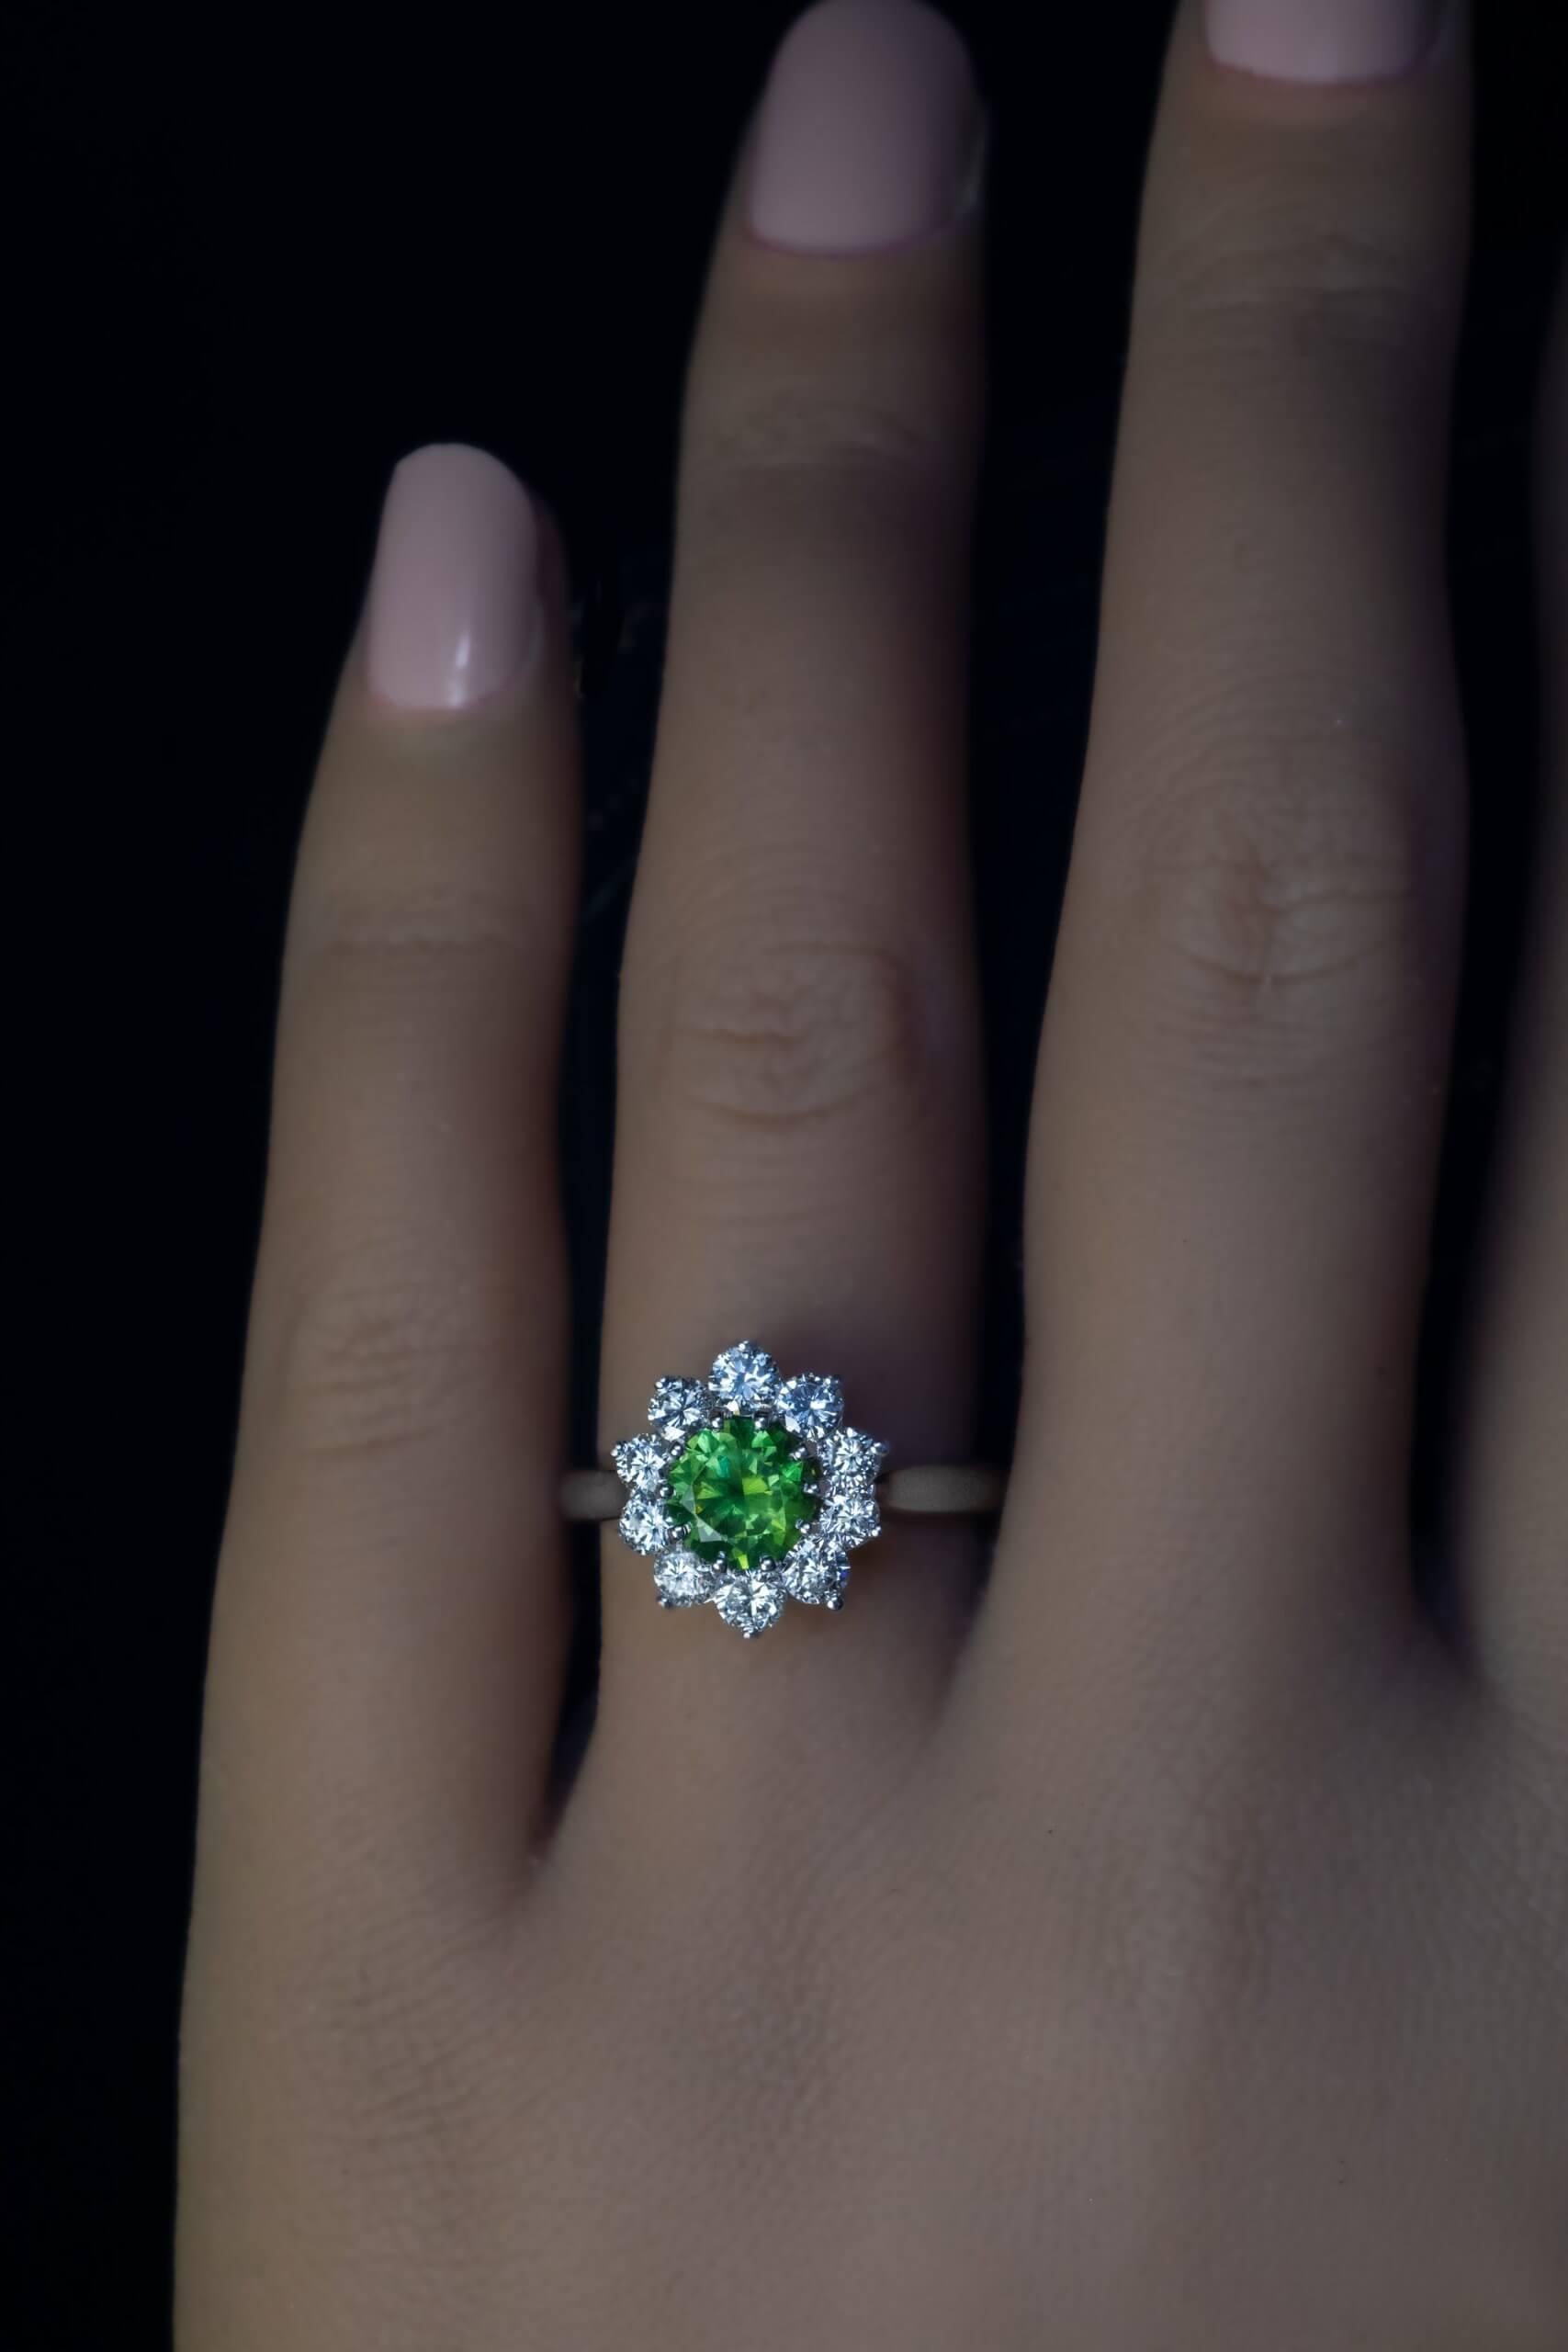 This contemporary custom-made cluster ring is crafted in 14K white gold. The ring features a golden green 1.08 ct brilliant cut Russian demantoid from the Ural Mountains. The demantoid is surrounded by bright white diamonds (F-G color, VS-SI